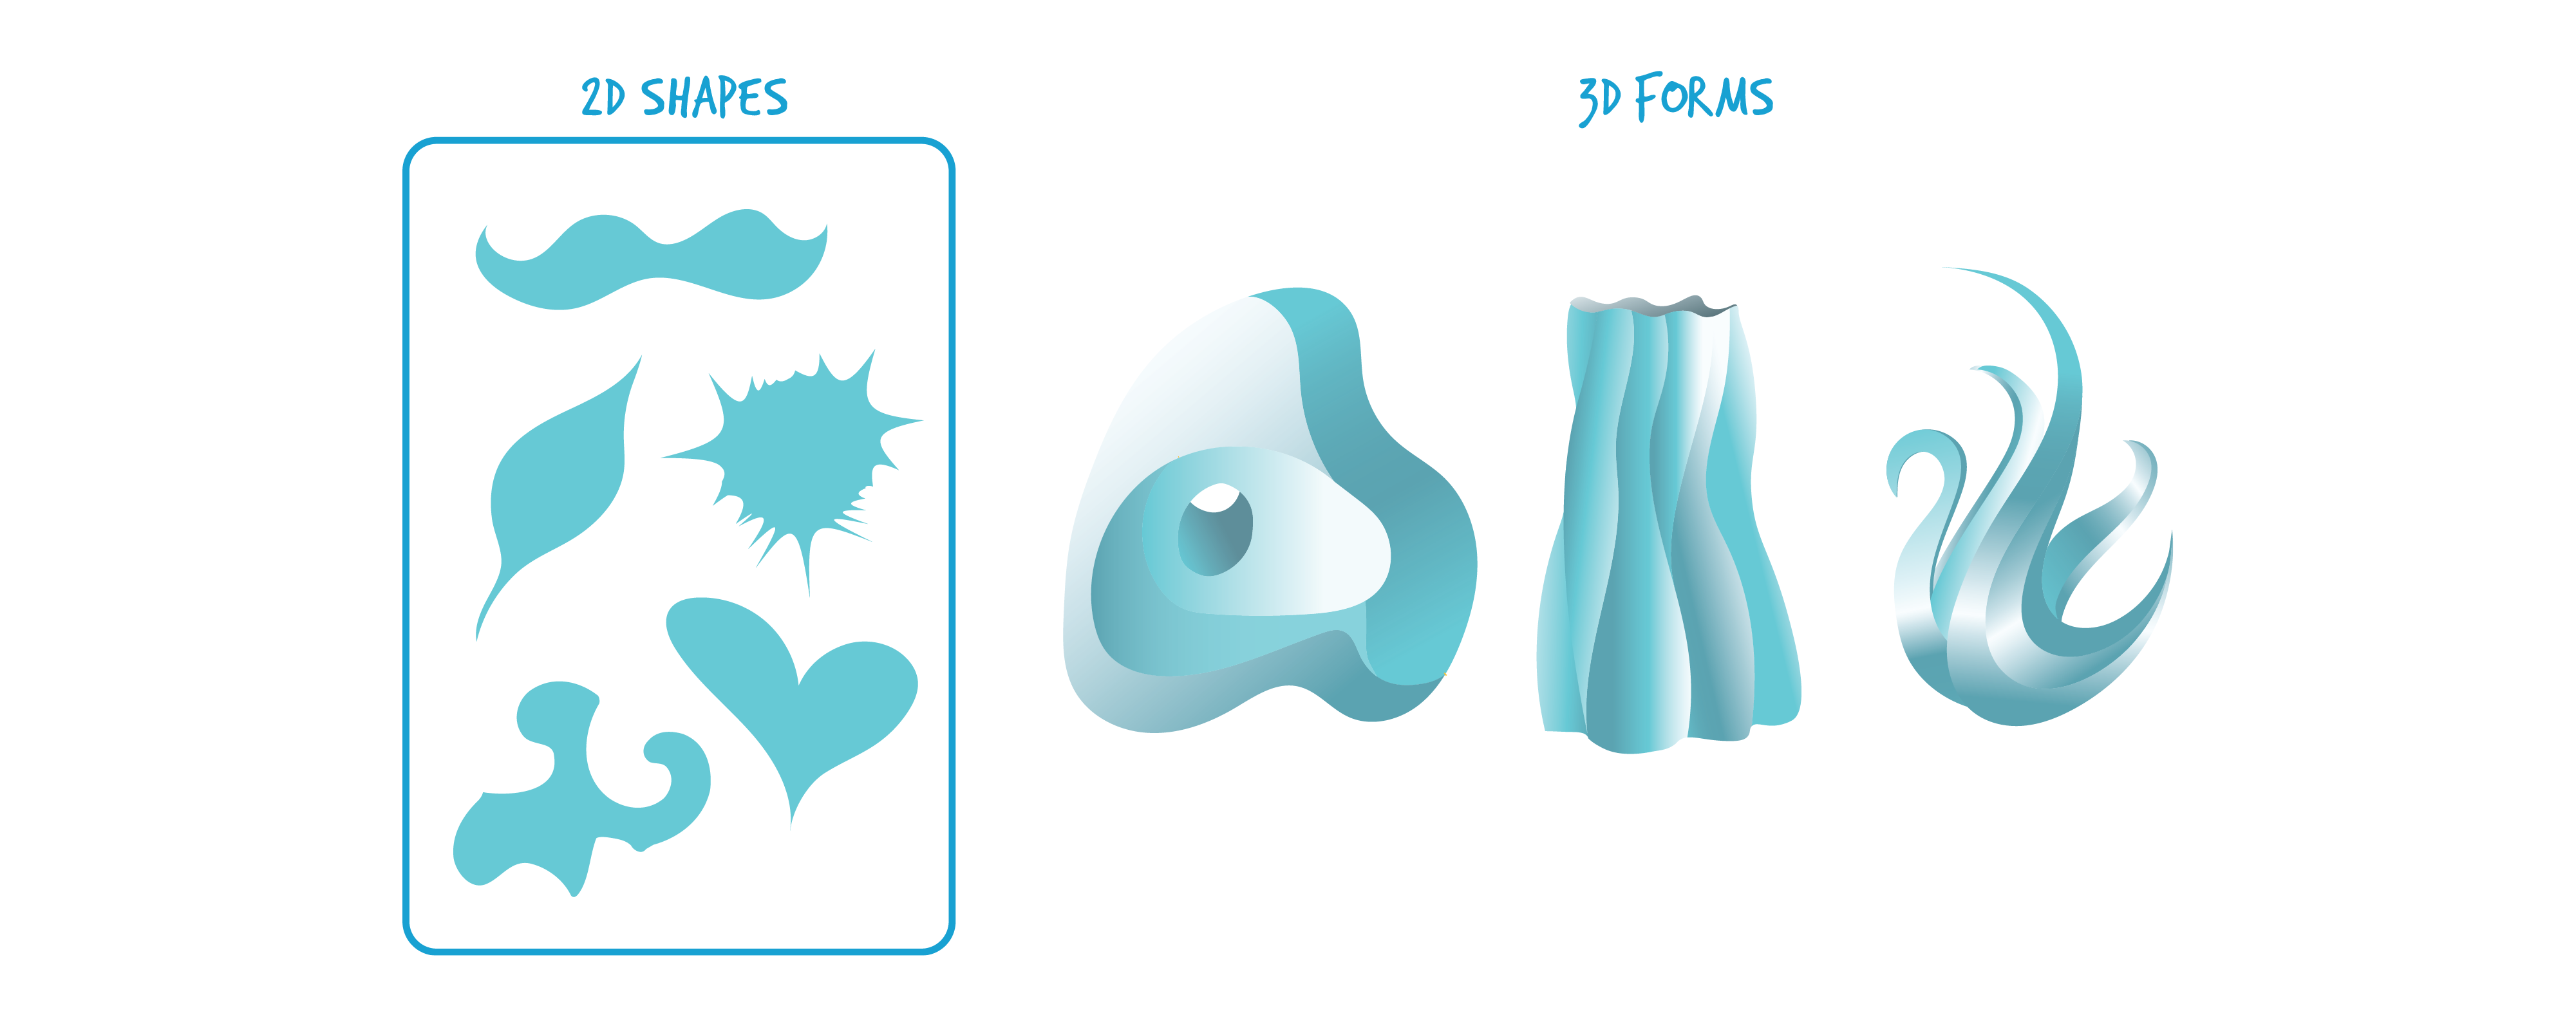 This image contains two main sections: on the left are examples of two-dimensional forms and on the right are examples of three-dimensional forms, all in yellow. The two-dimensional organic forms, in reading order from left to right, resemble a moustache, a leaf, a splatter, a heart, and a wavy shape. The three-dimensional forms on the right show 3 examples of various organic forms that are wavy, curvy, and irregular.